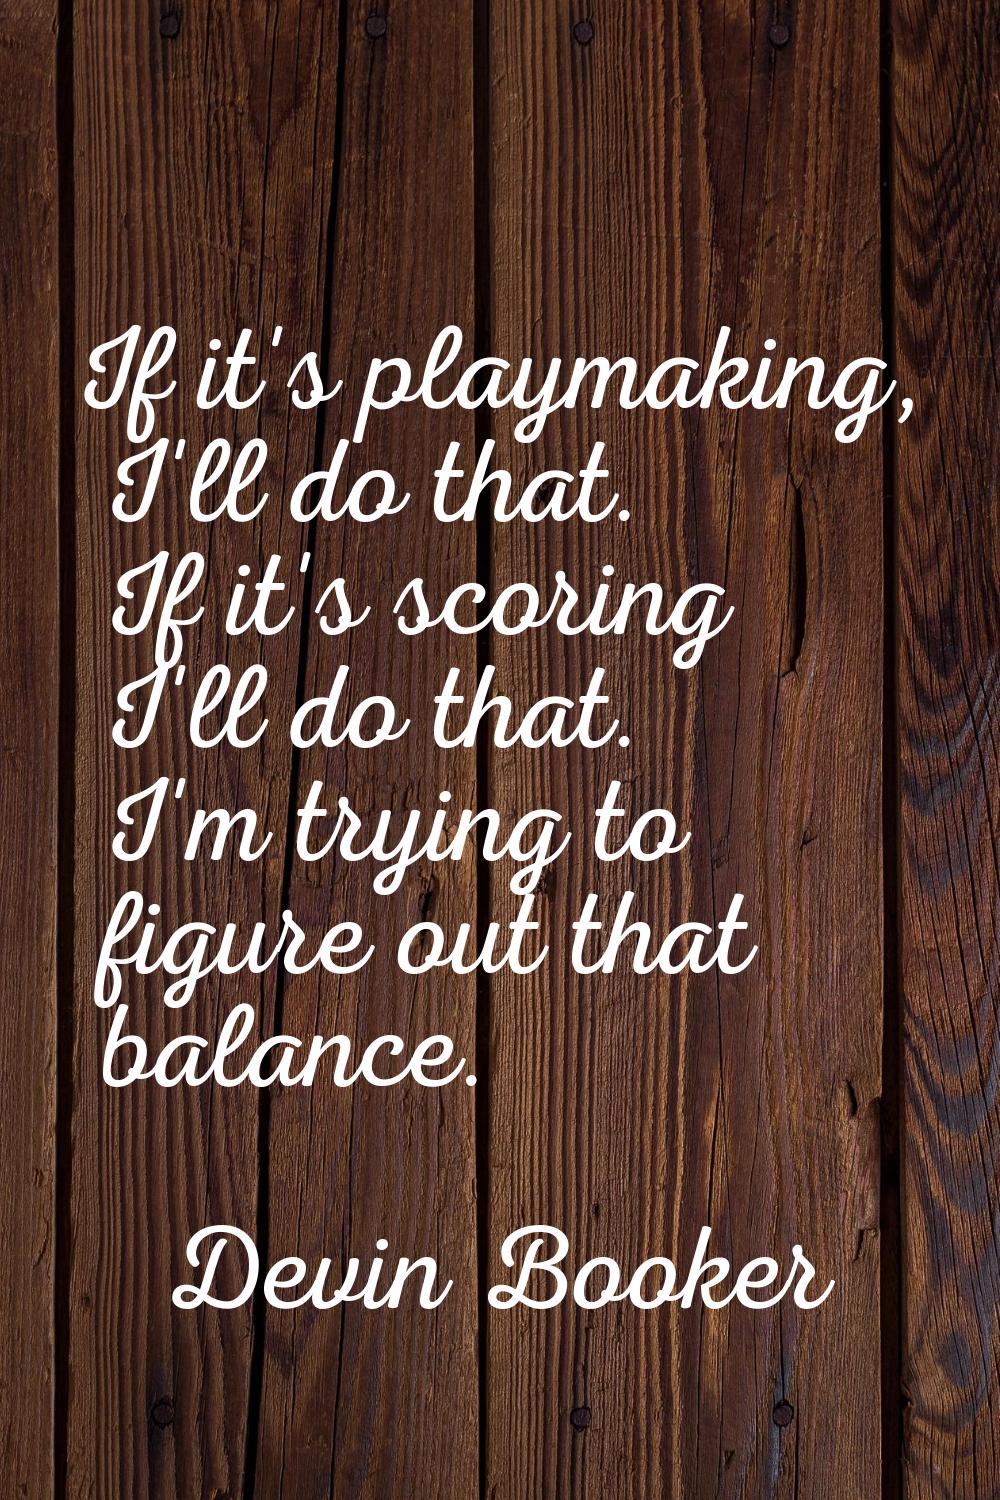 If it's playmaking, I'll do that. If it's scoring I'll do that. I'm trying to figure out that balan